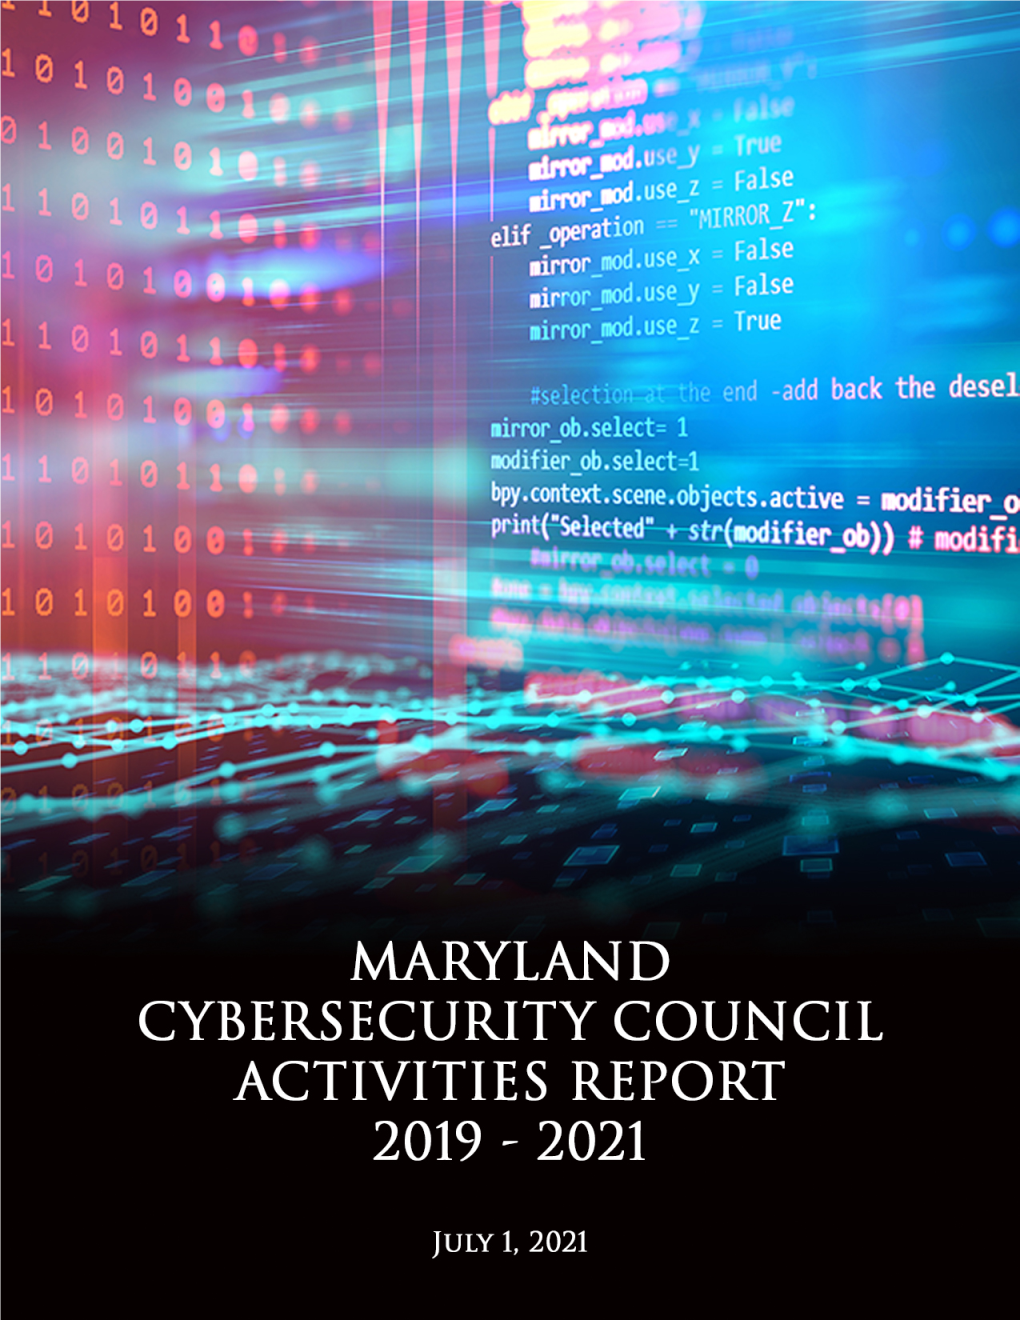 Maryland Cybersecurity Council Activities Report 2019-2021